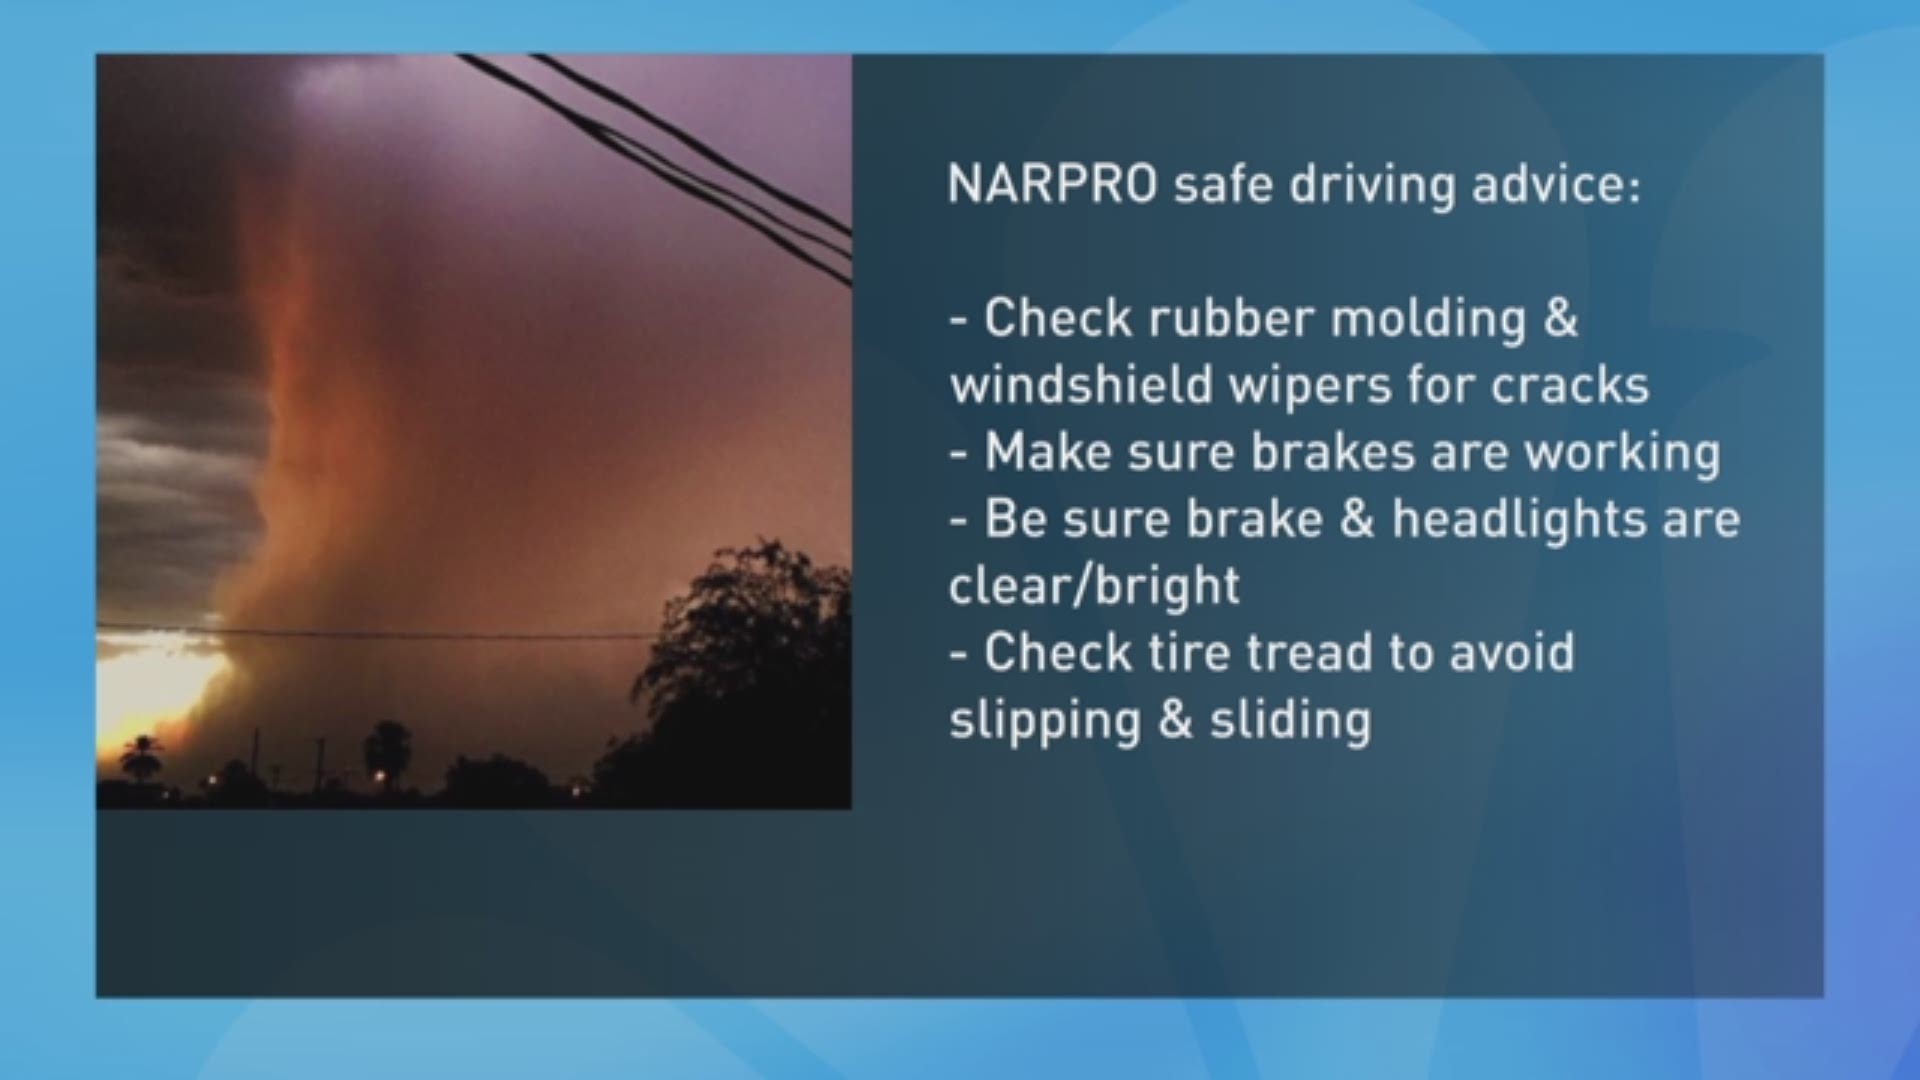 NARPRO has provided driving tips to keep you safe during the monsoon season.